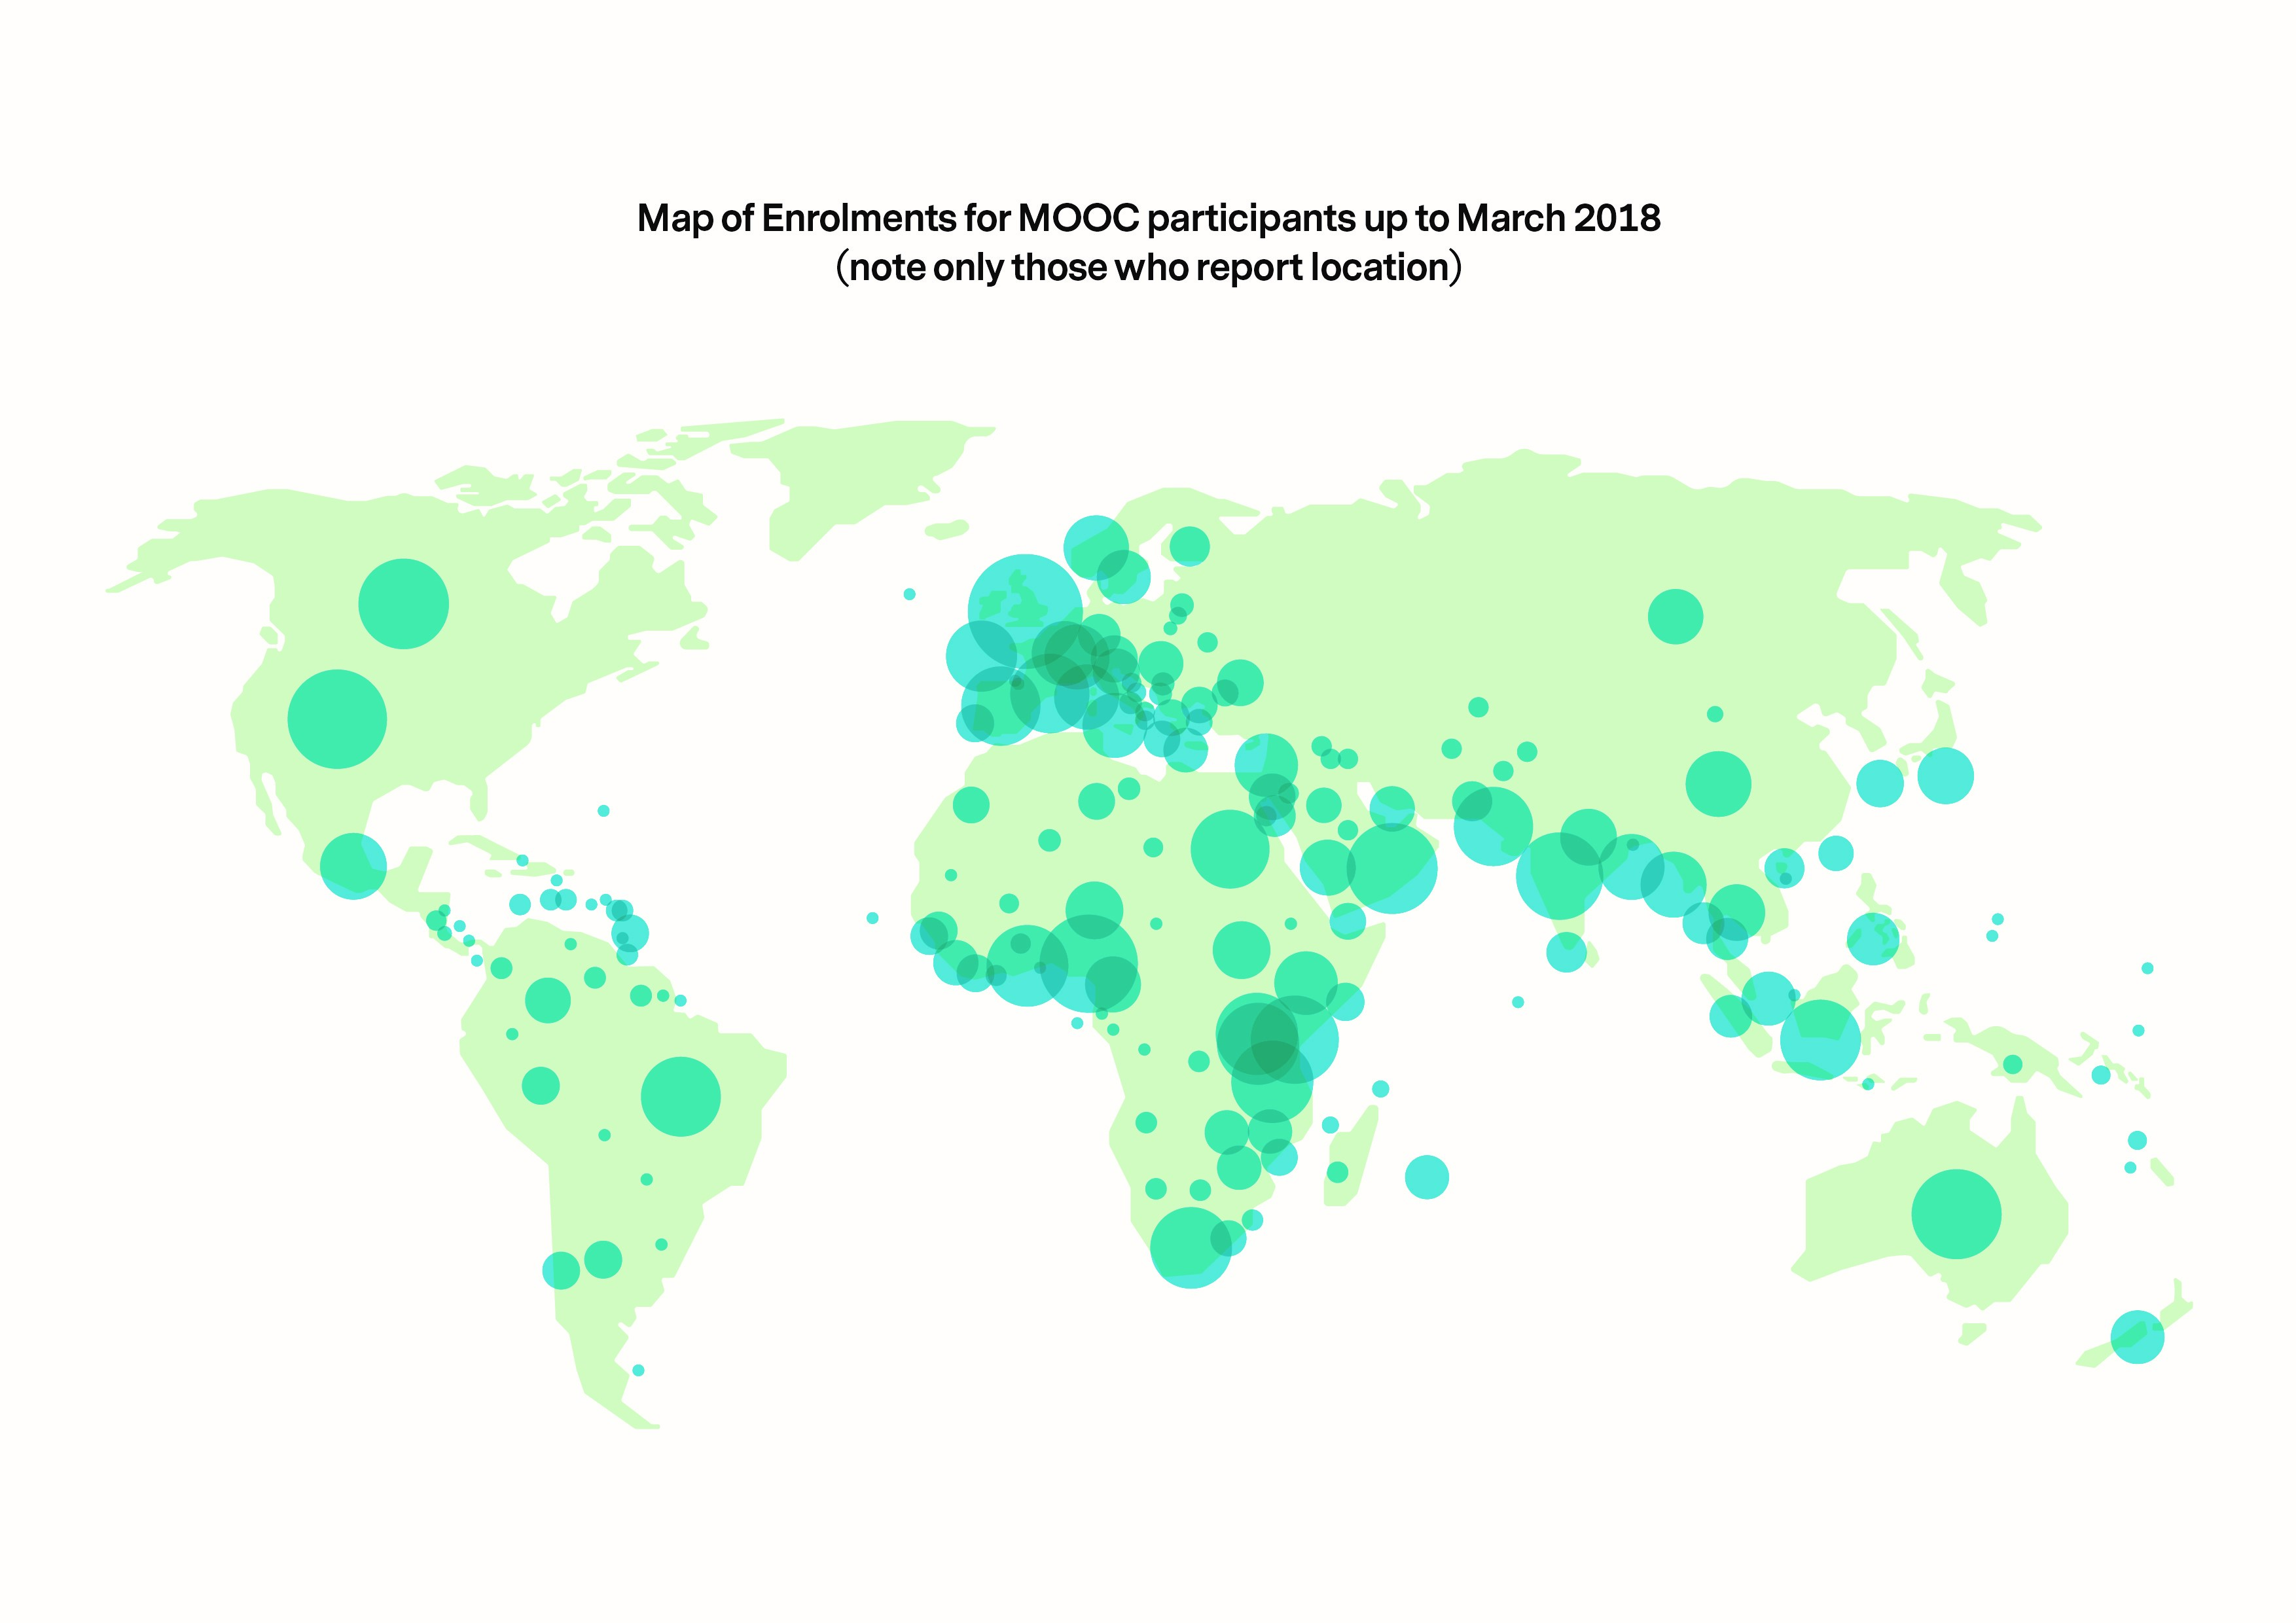 Map of enrolments for MOOC participants up to March 2018